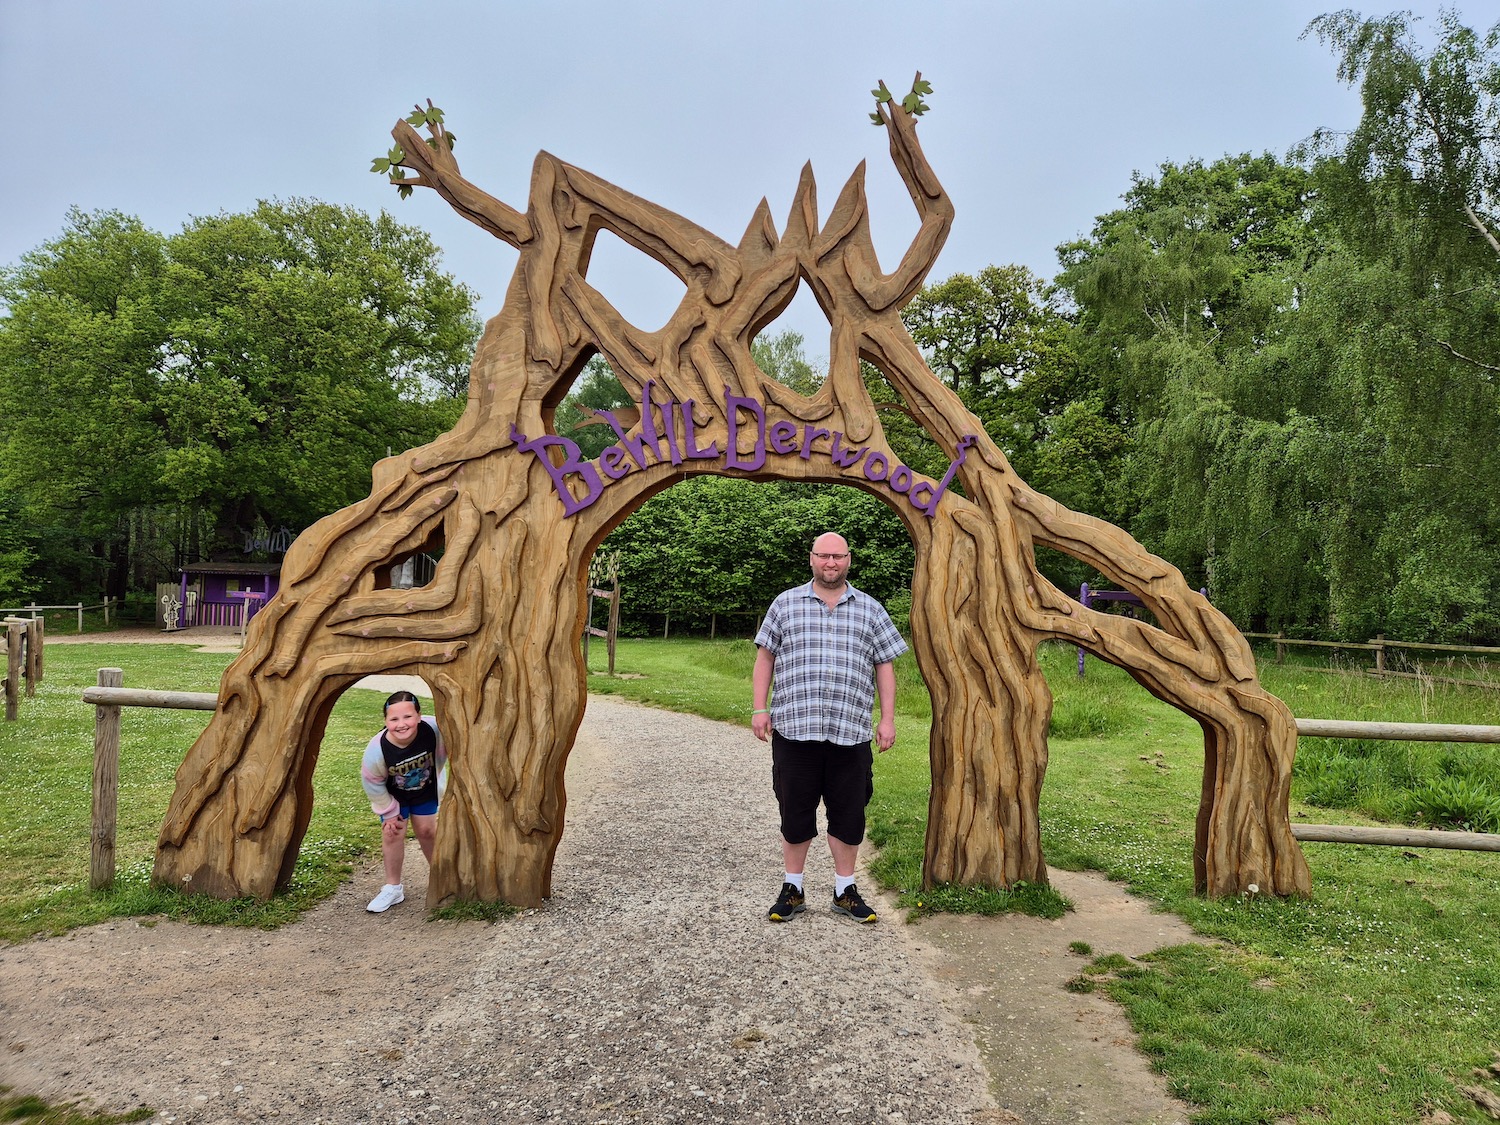 John and Erin at the Bewilderwood entrance